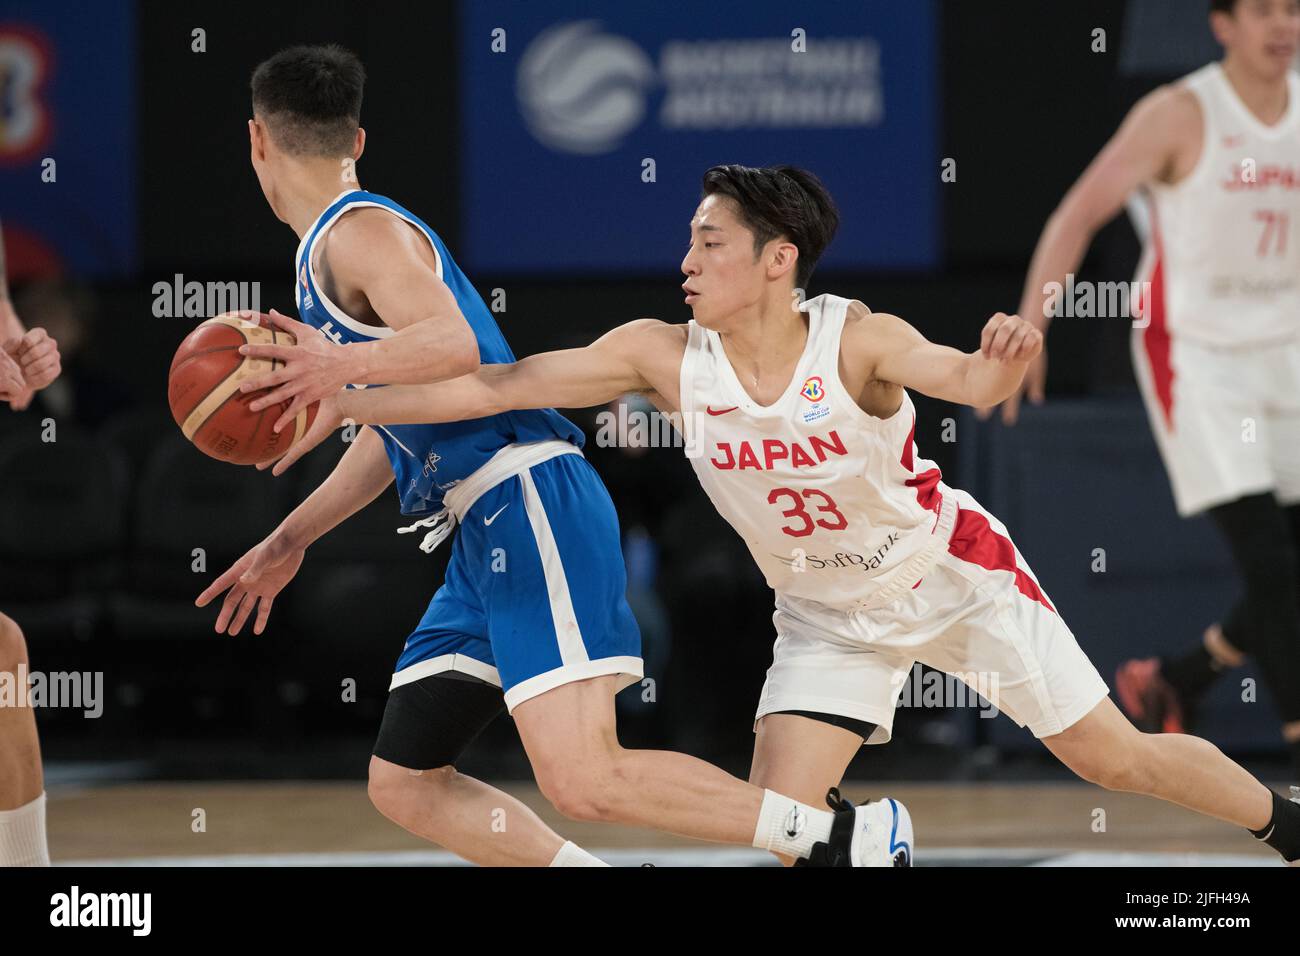 Yuki Kawamura Of Japan Basketball Team Seen In Action During The Fiba World Cup Qualifiers